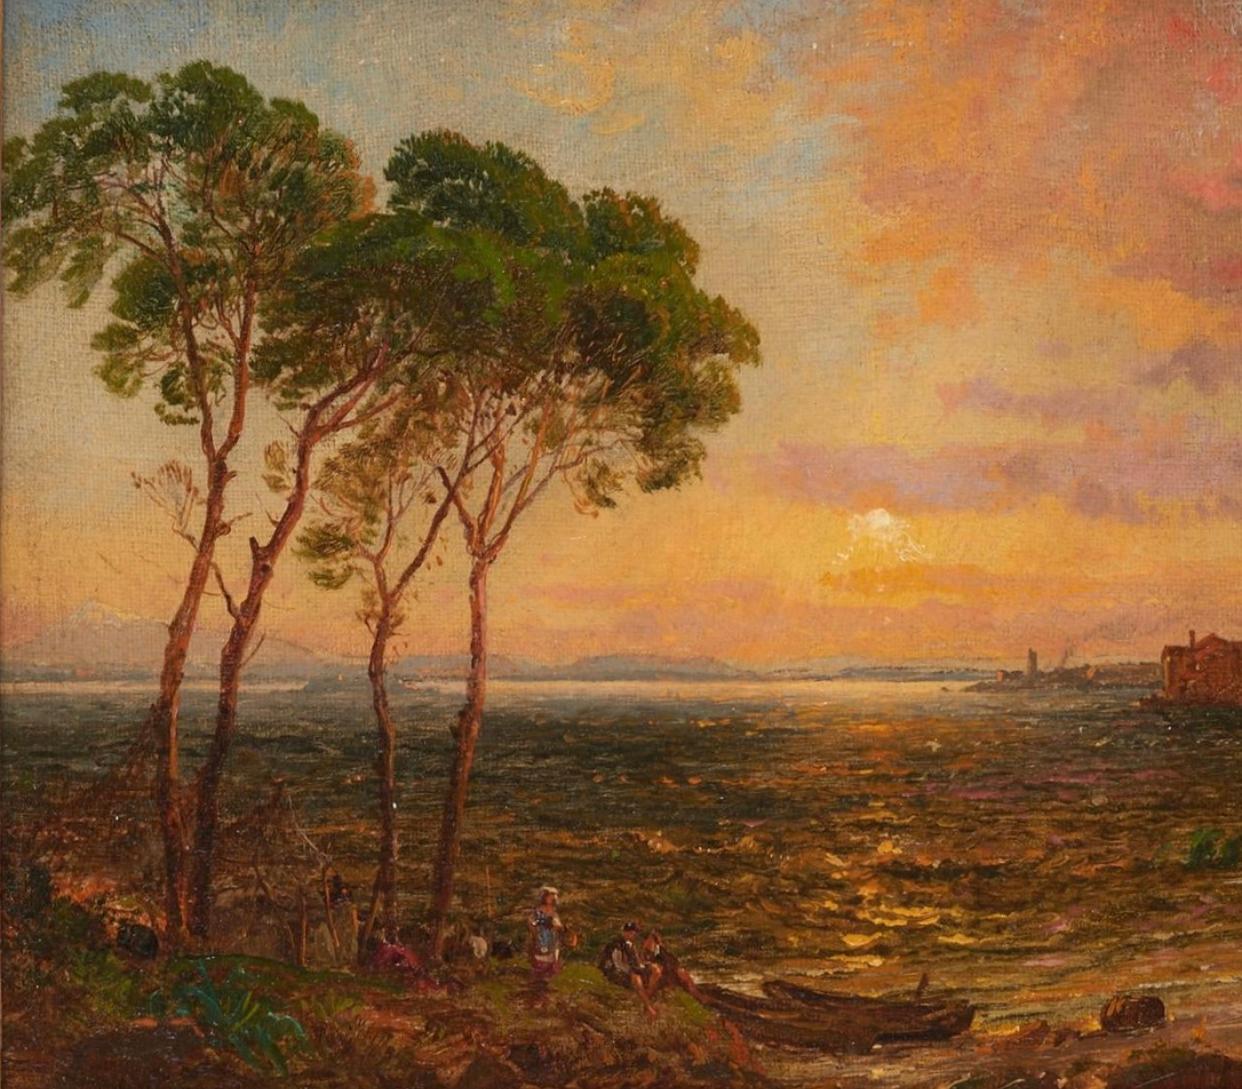 
Jasper Francis Cropsey, oil on canvas, 1881, Jasper Francis Cropsey (American, 1823-1900), Study for 